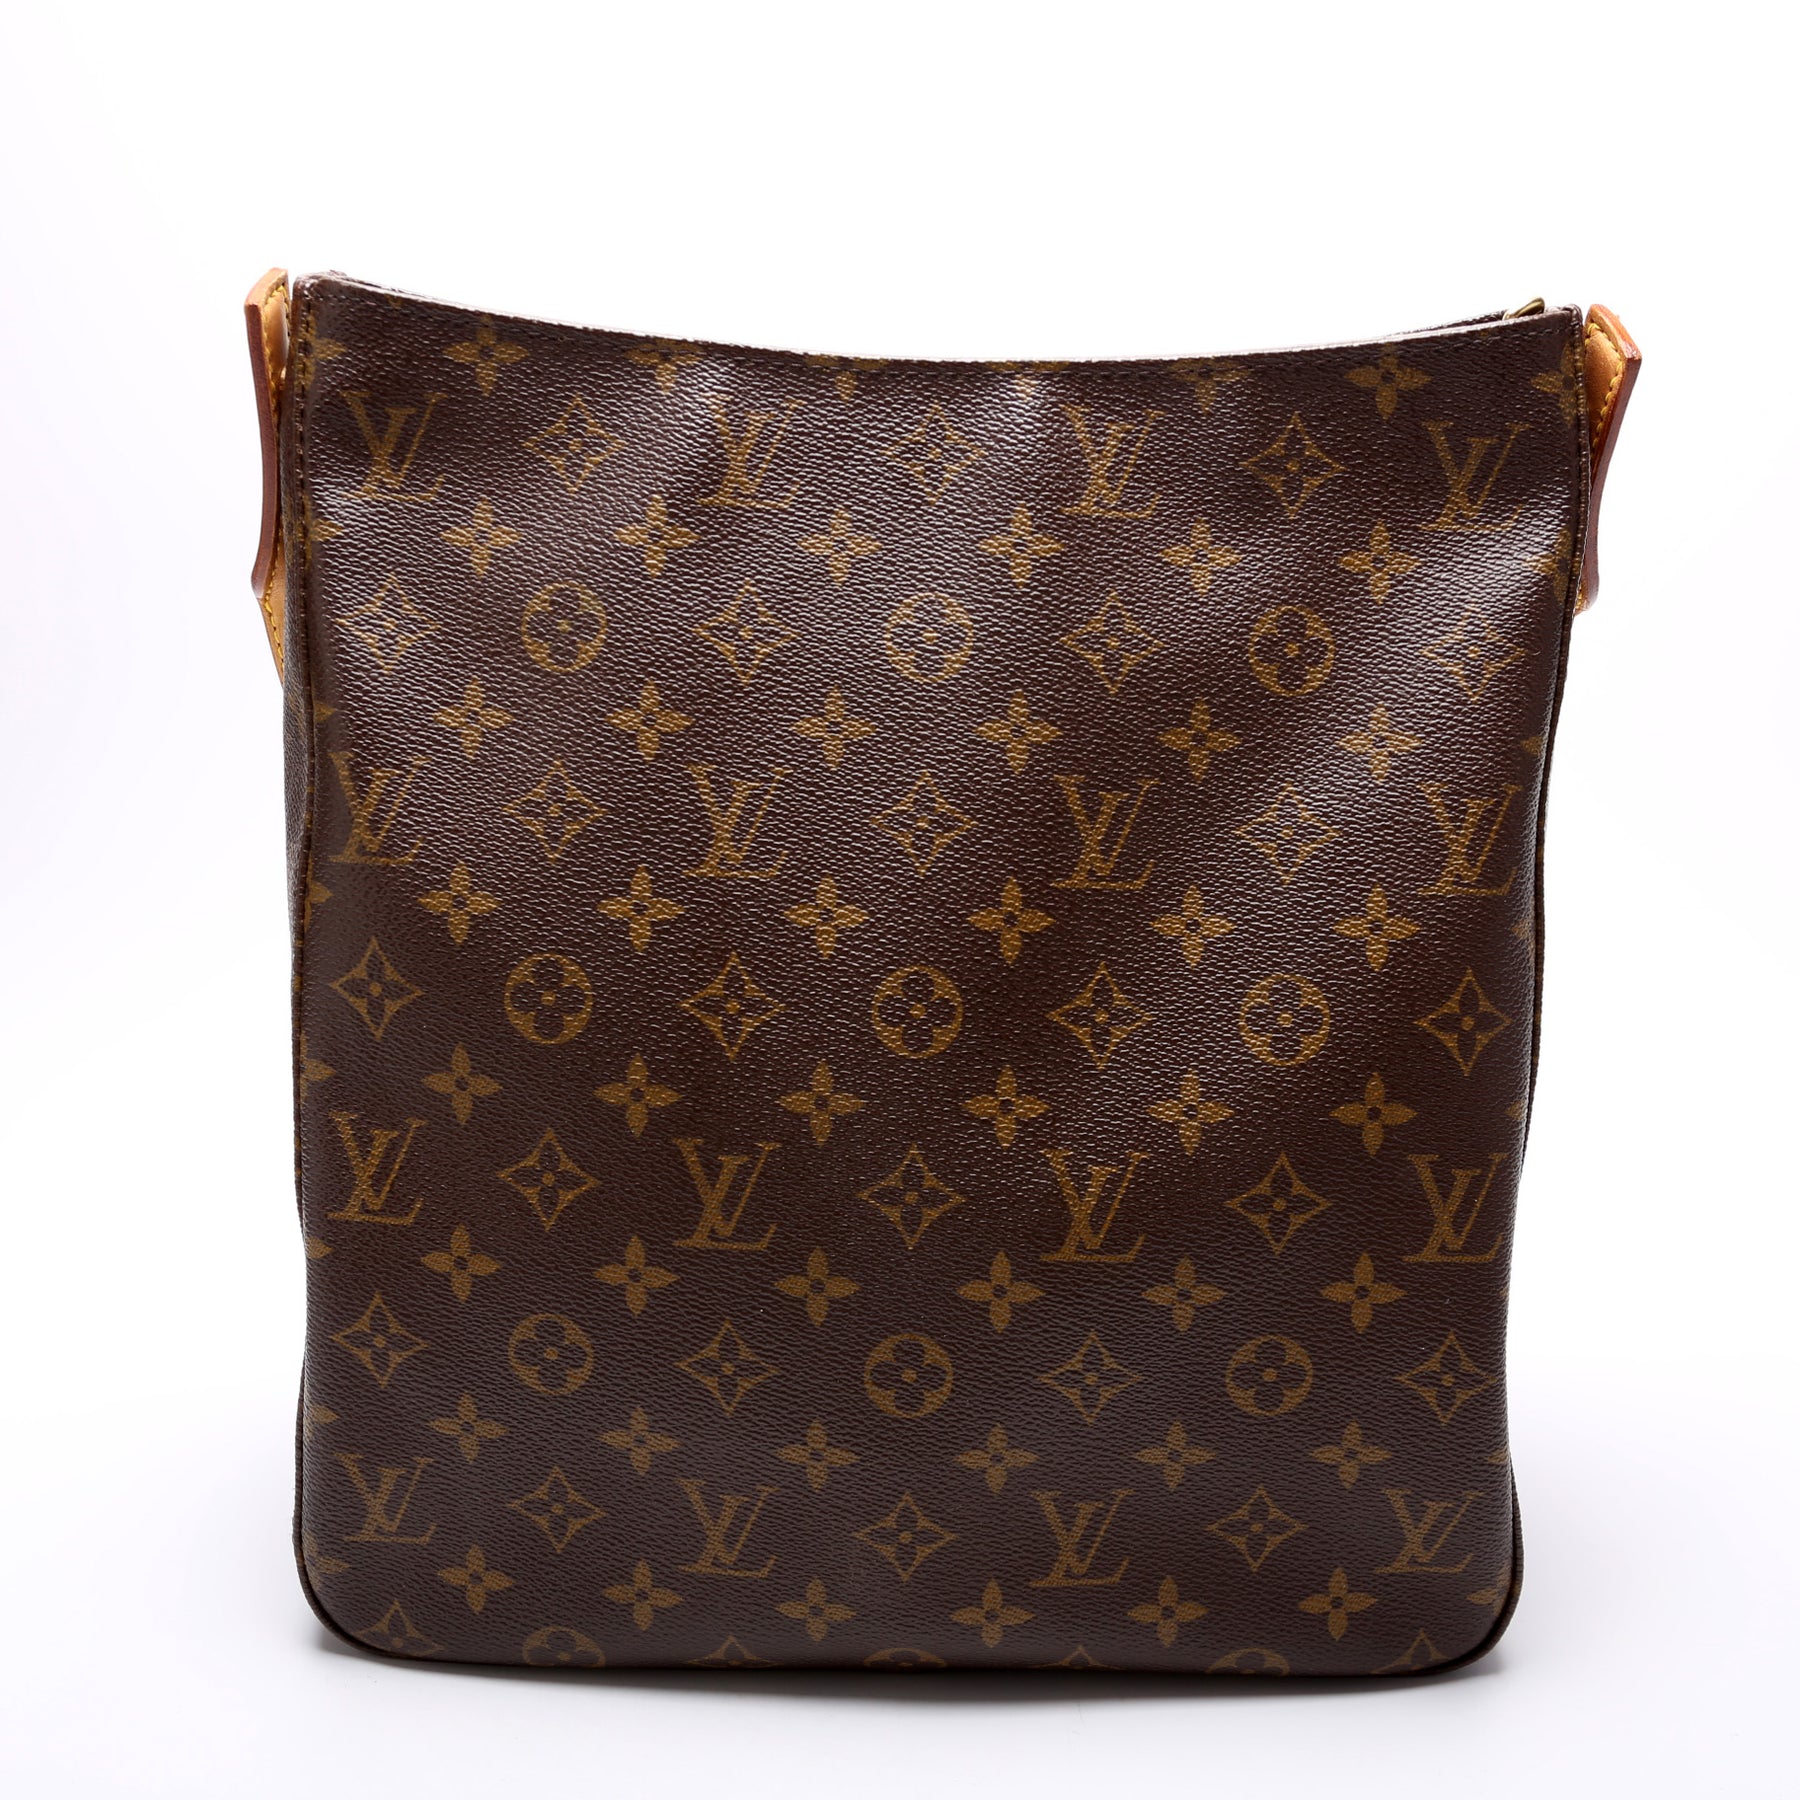 Louis Vuitton Monogram Canvas And Leather Looping GM Bag Louis